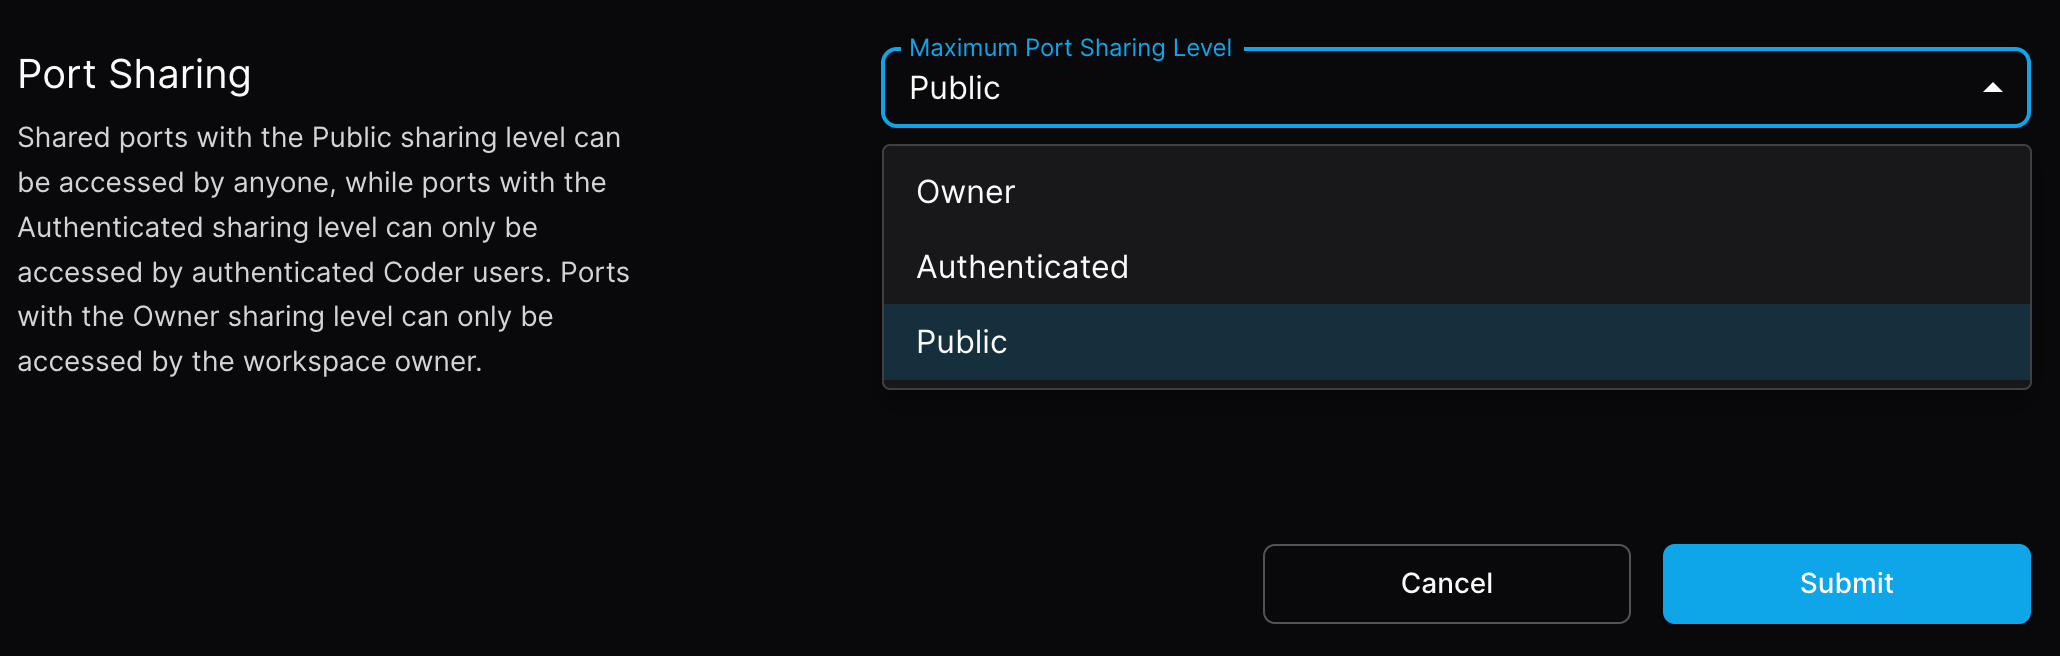 Max port sharing level in the UI